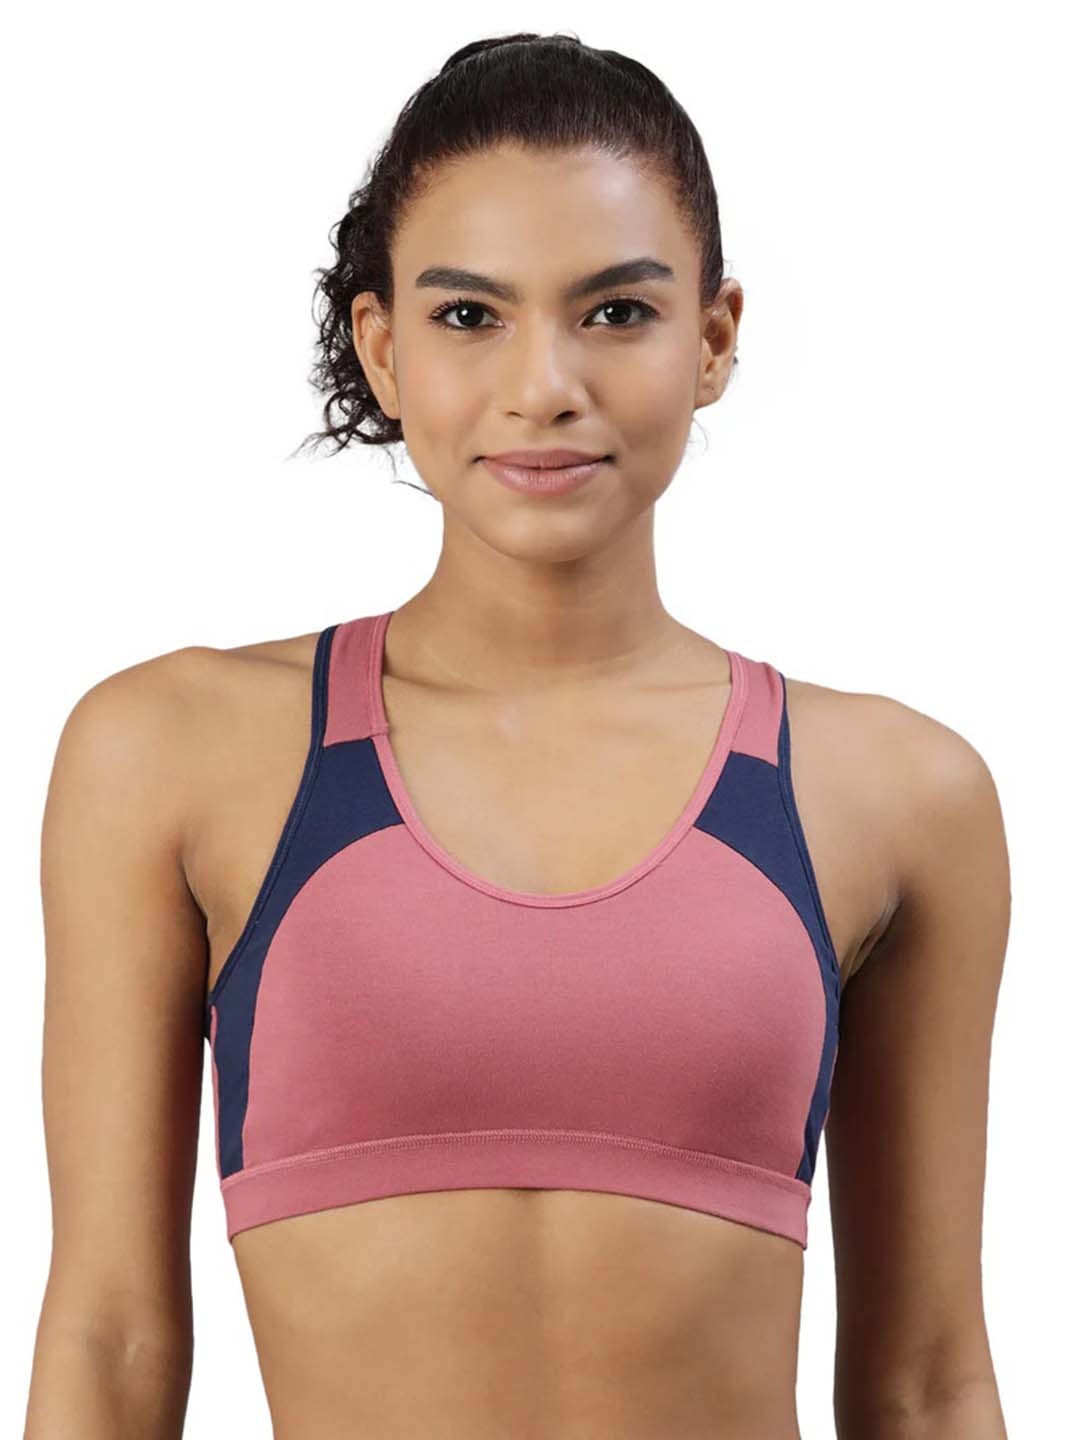 

BLOSSOM Non Padded and Racer Back Dry Fit Cotton Workout Bra With All Day Comfort, Rose gold